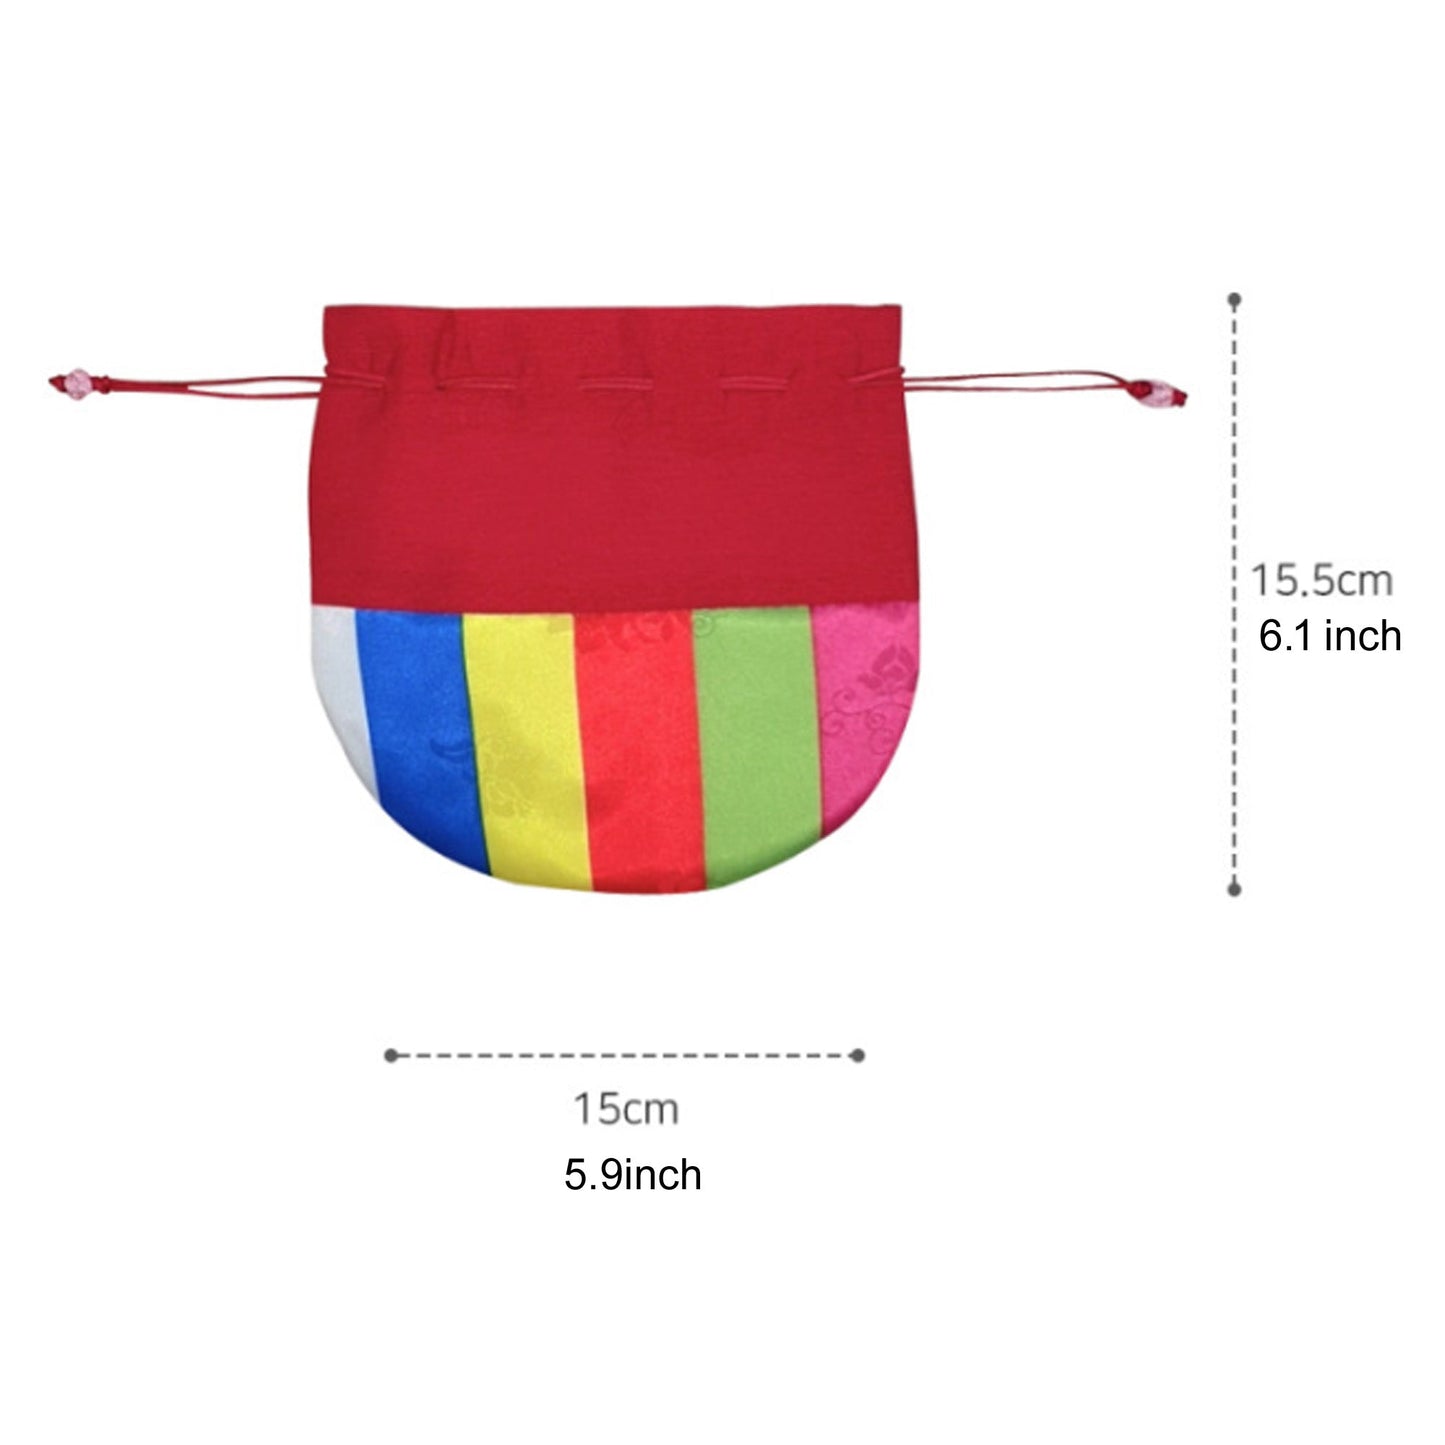 Stripes of Many Colors Pouch with Korean Traditional Knot(Maedeup) Red